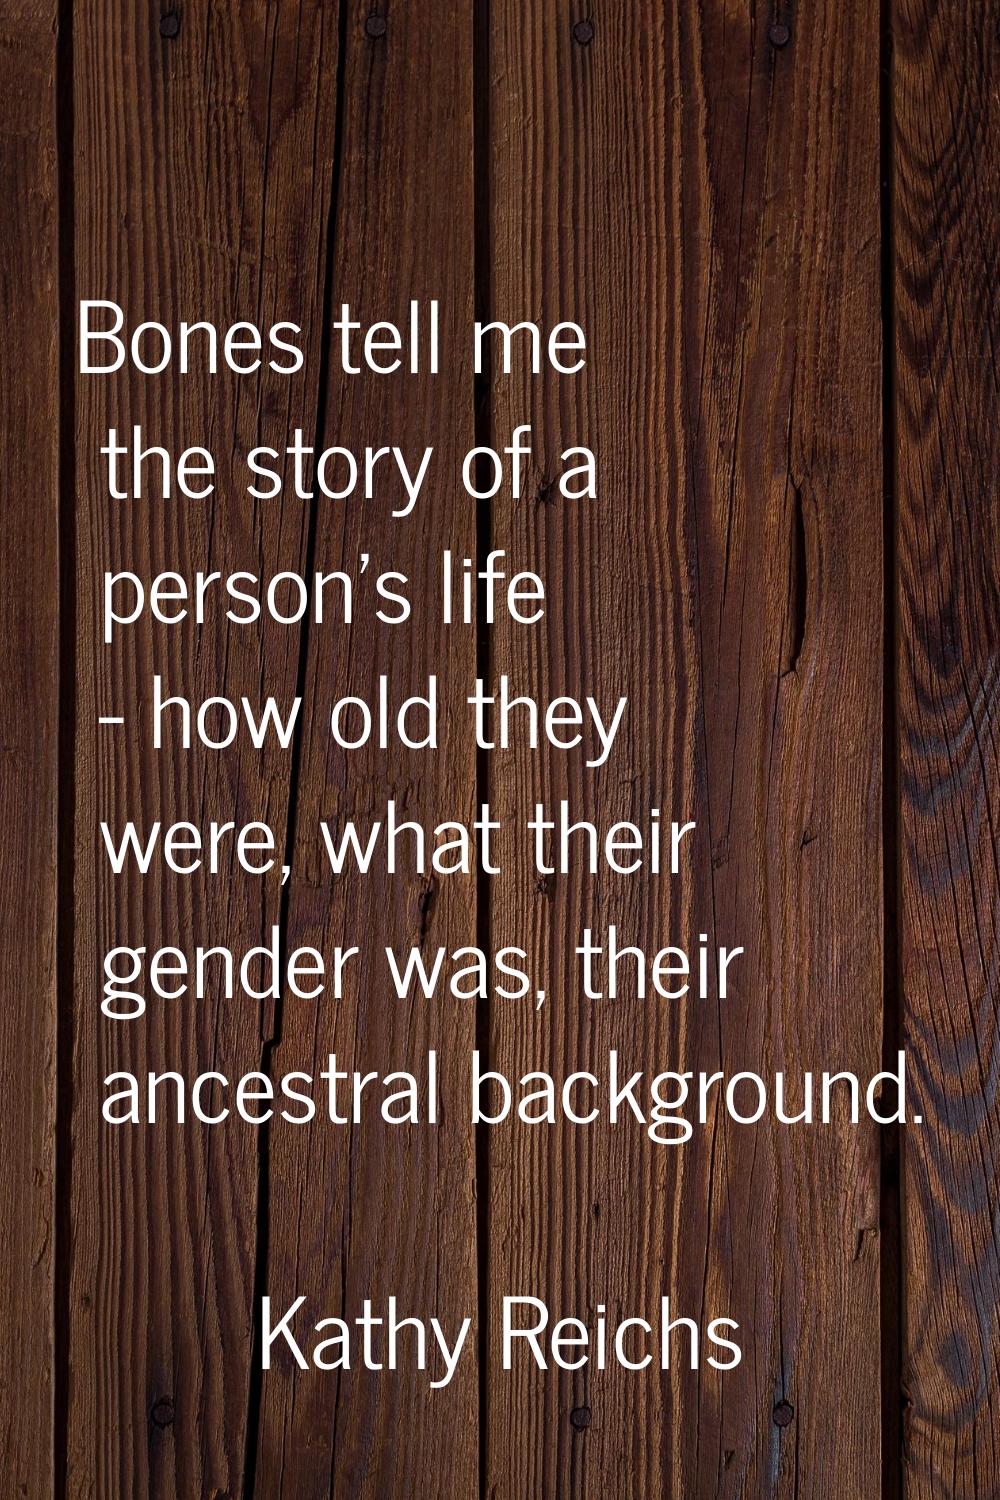 Bones tell me the story of a person's life - how old they were, what their gender was, their ancest